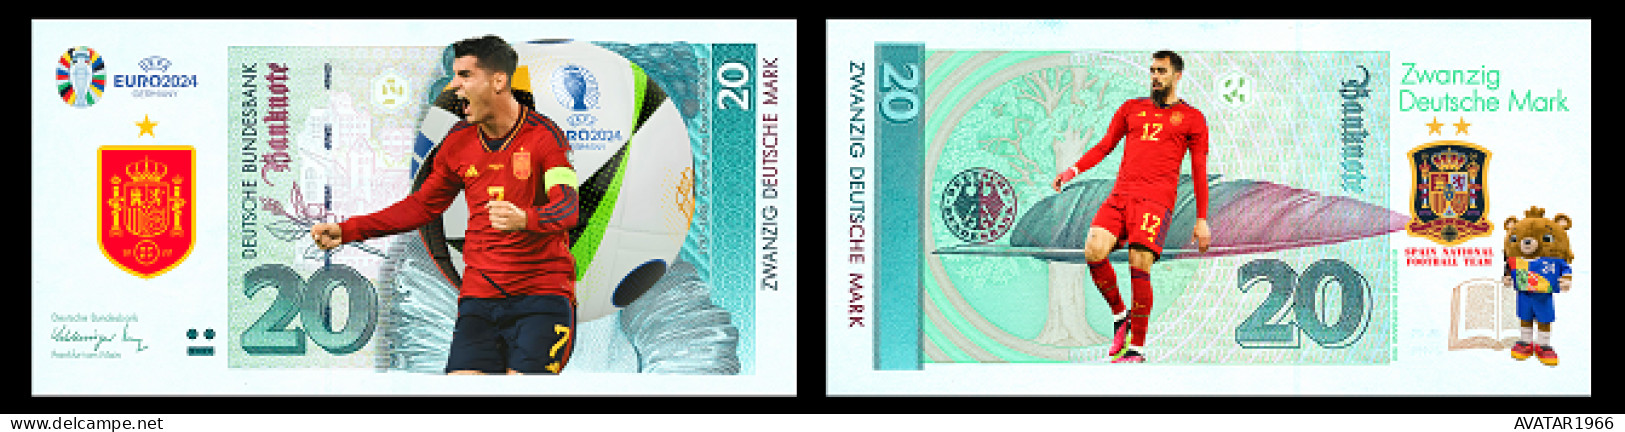 UEFA European Football Championship 2024 Qualified Country Spain  8 Pieces Germany Fantasy Paper Money - [15] Commemoratives & Special Issues